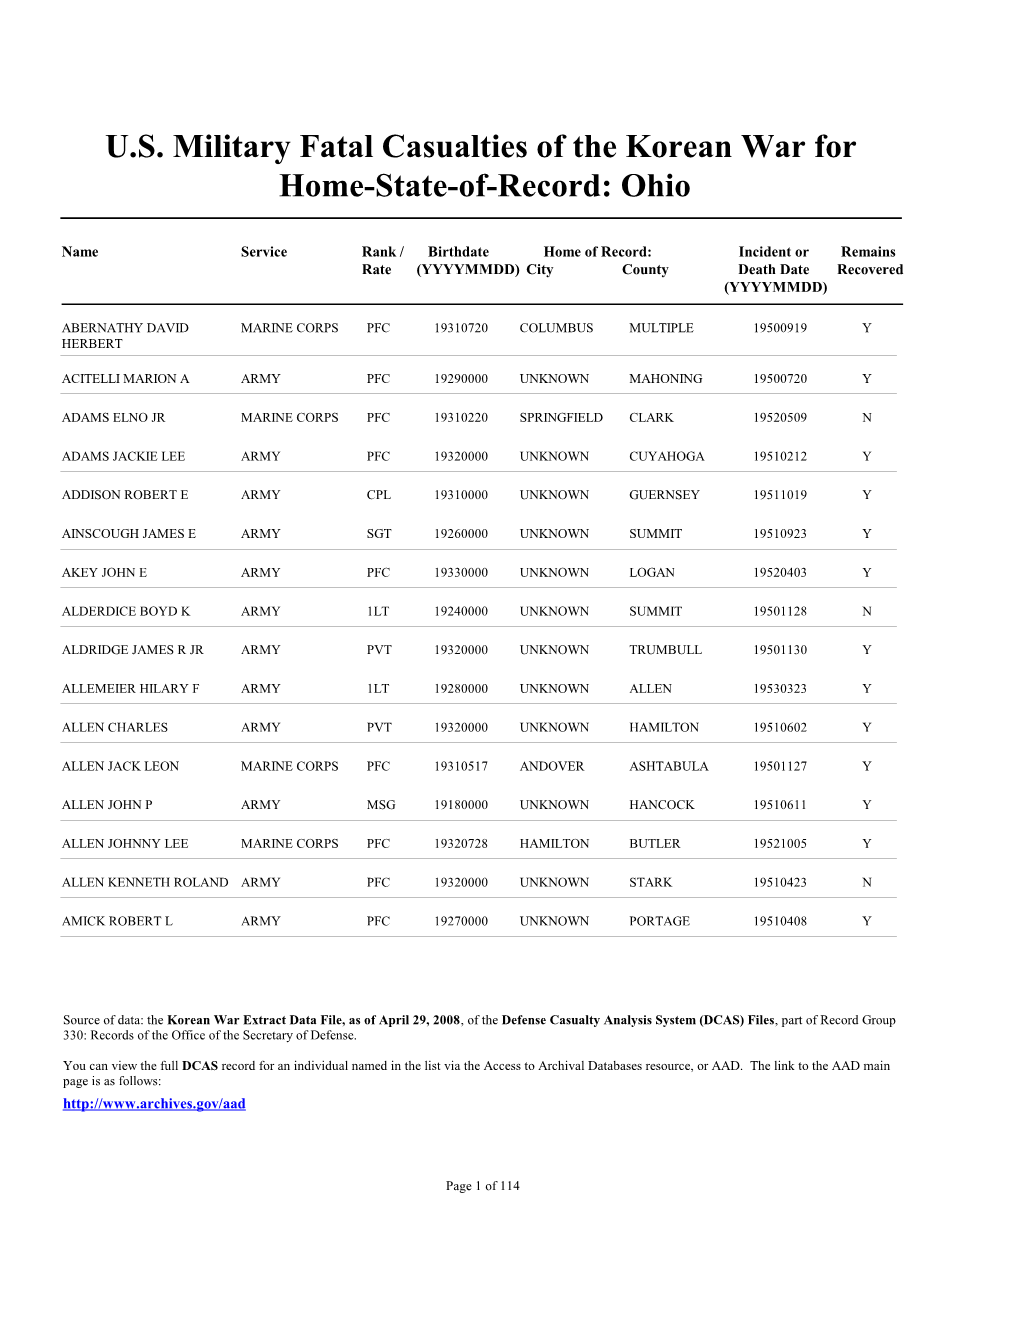 U.S. Military Fatal Casualties of the Korean War for Home-State-Of-Record: Ohio